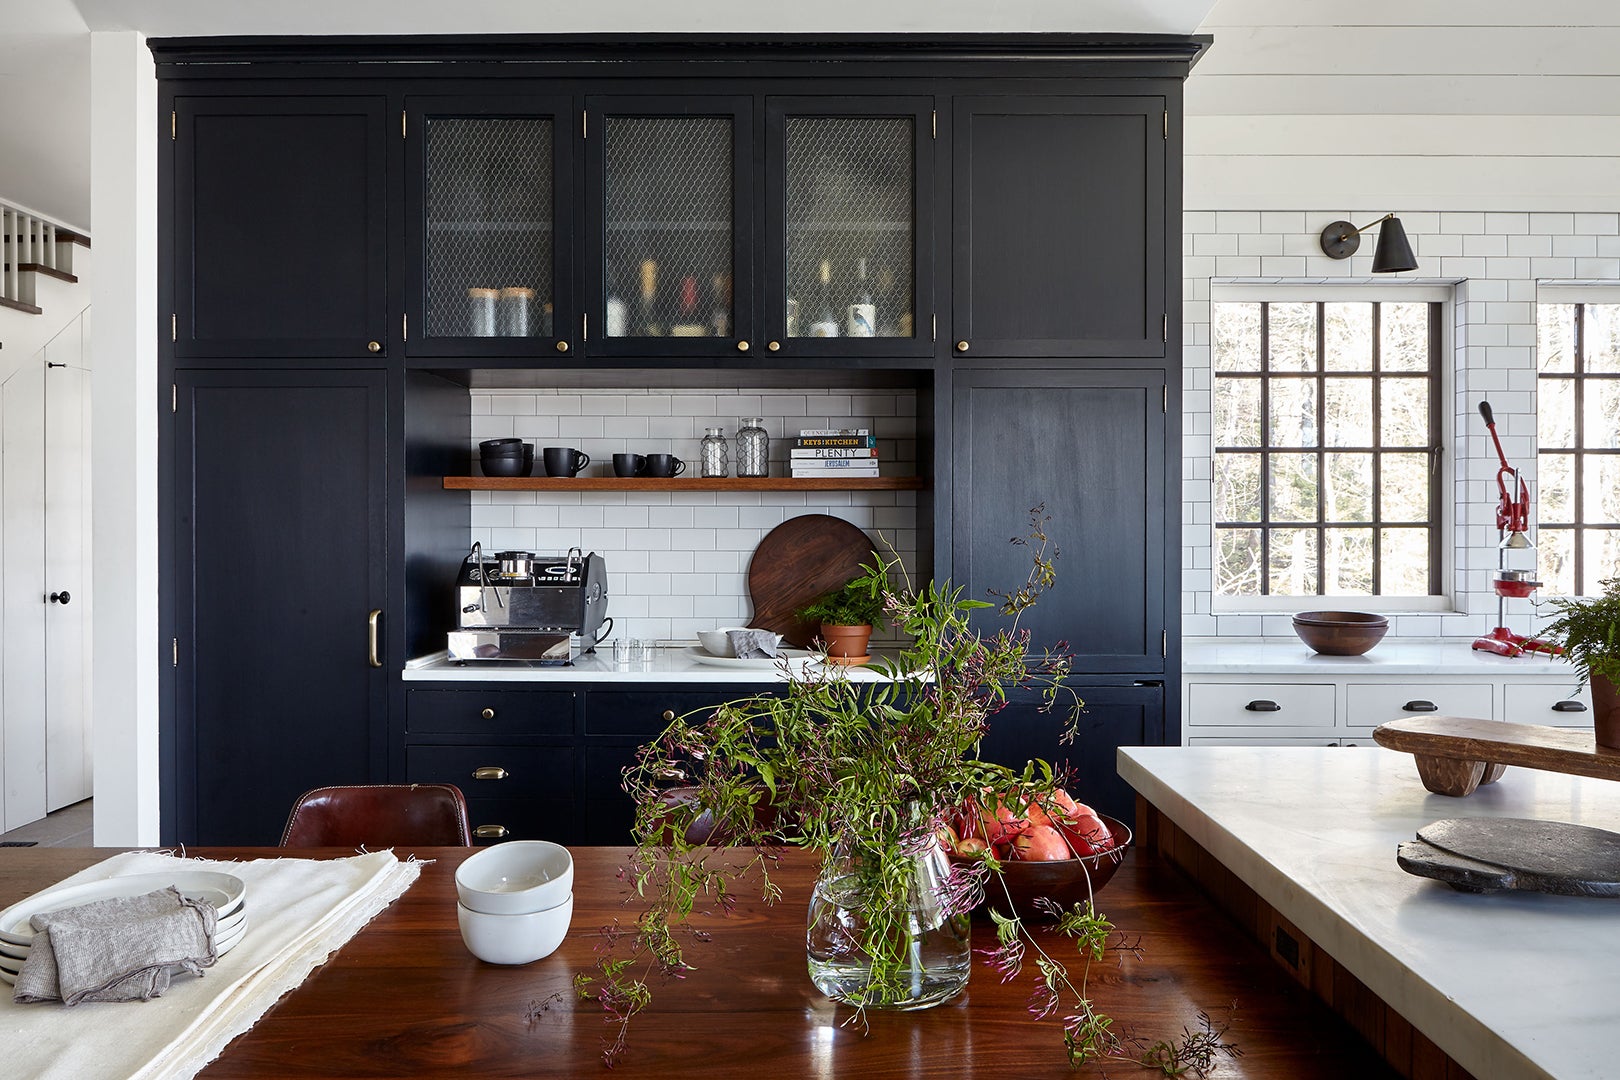 Blue kitchen cabinets and white subway tile